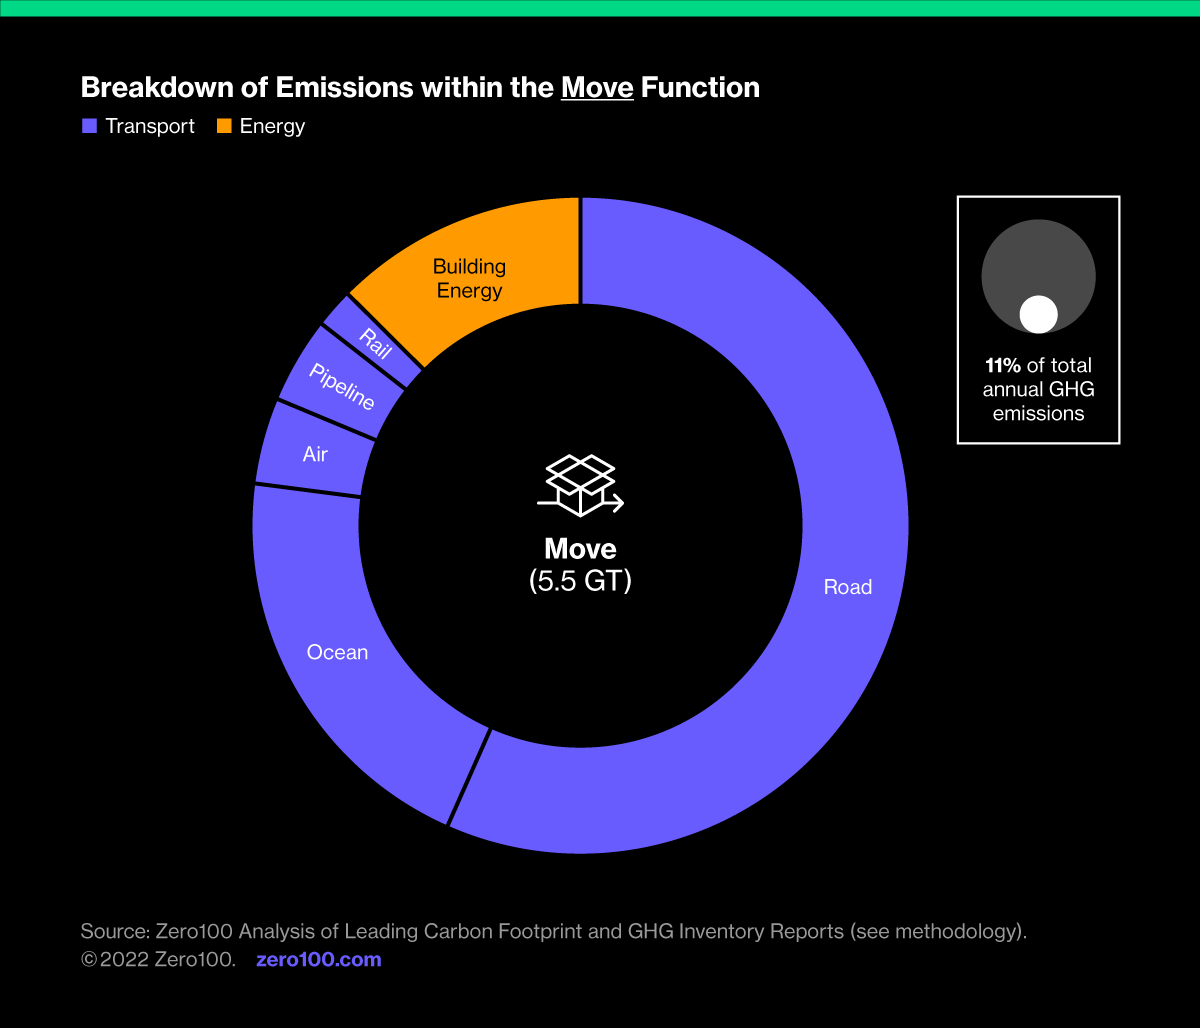 Graph depicting the breakdown of emissions within the Move function. Source: Zero100 Analysis of Leading Carbon footprint and GHG Inventory Reports.